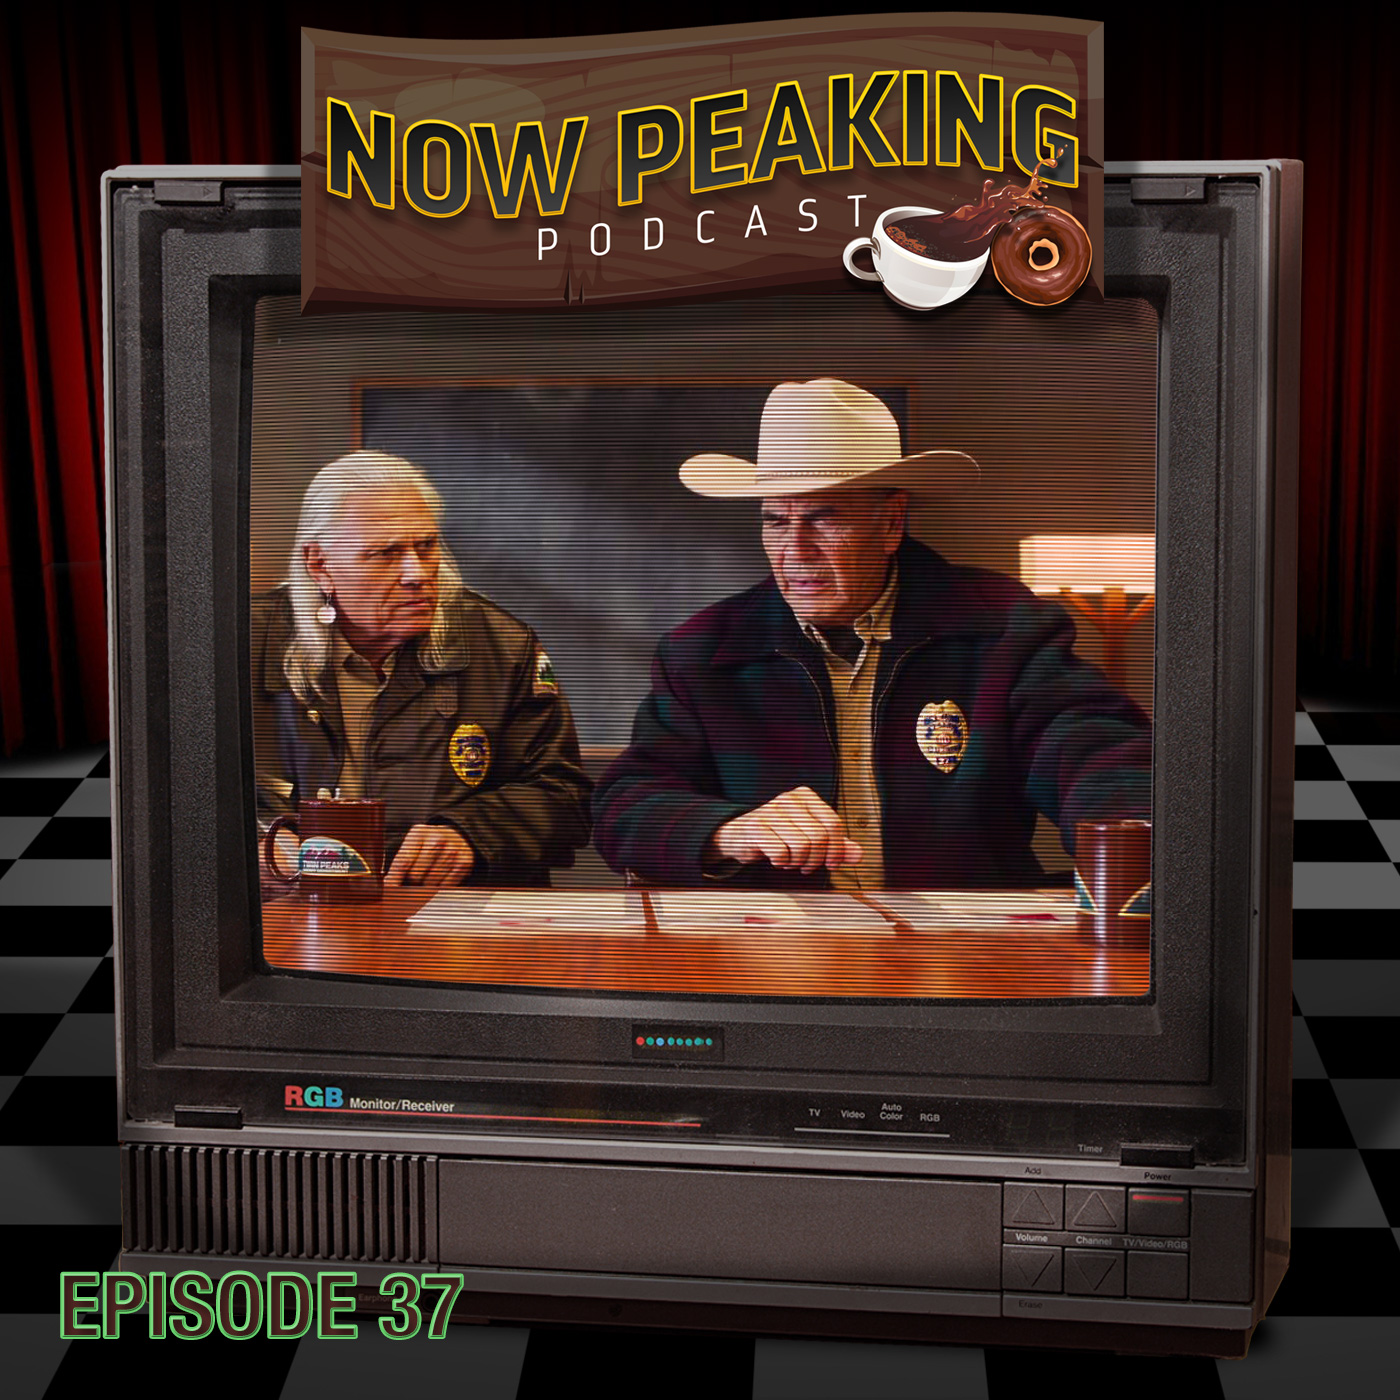 Now Peaking Episode 37: There’s a body all right  - For Annual Subscribers 